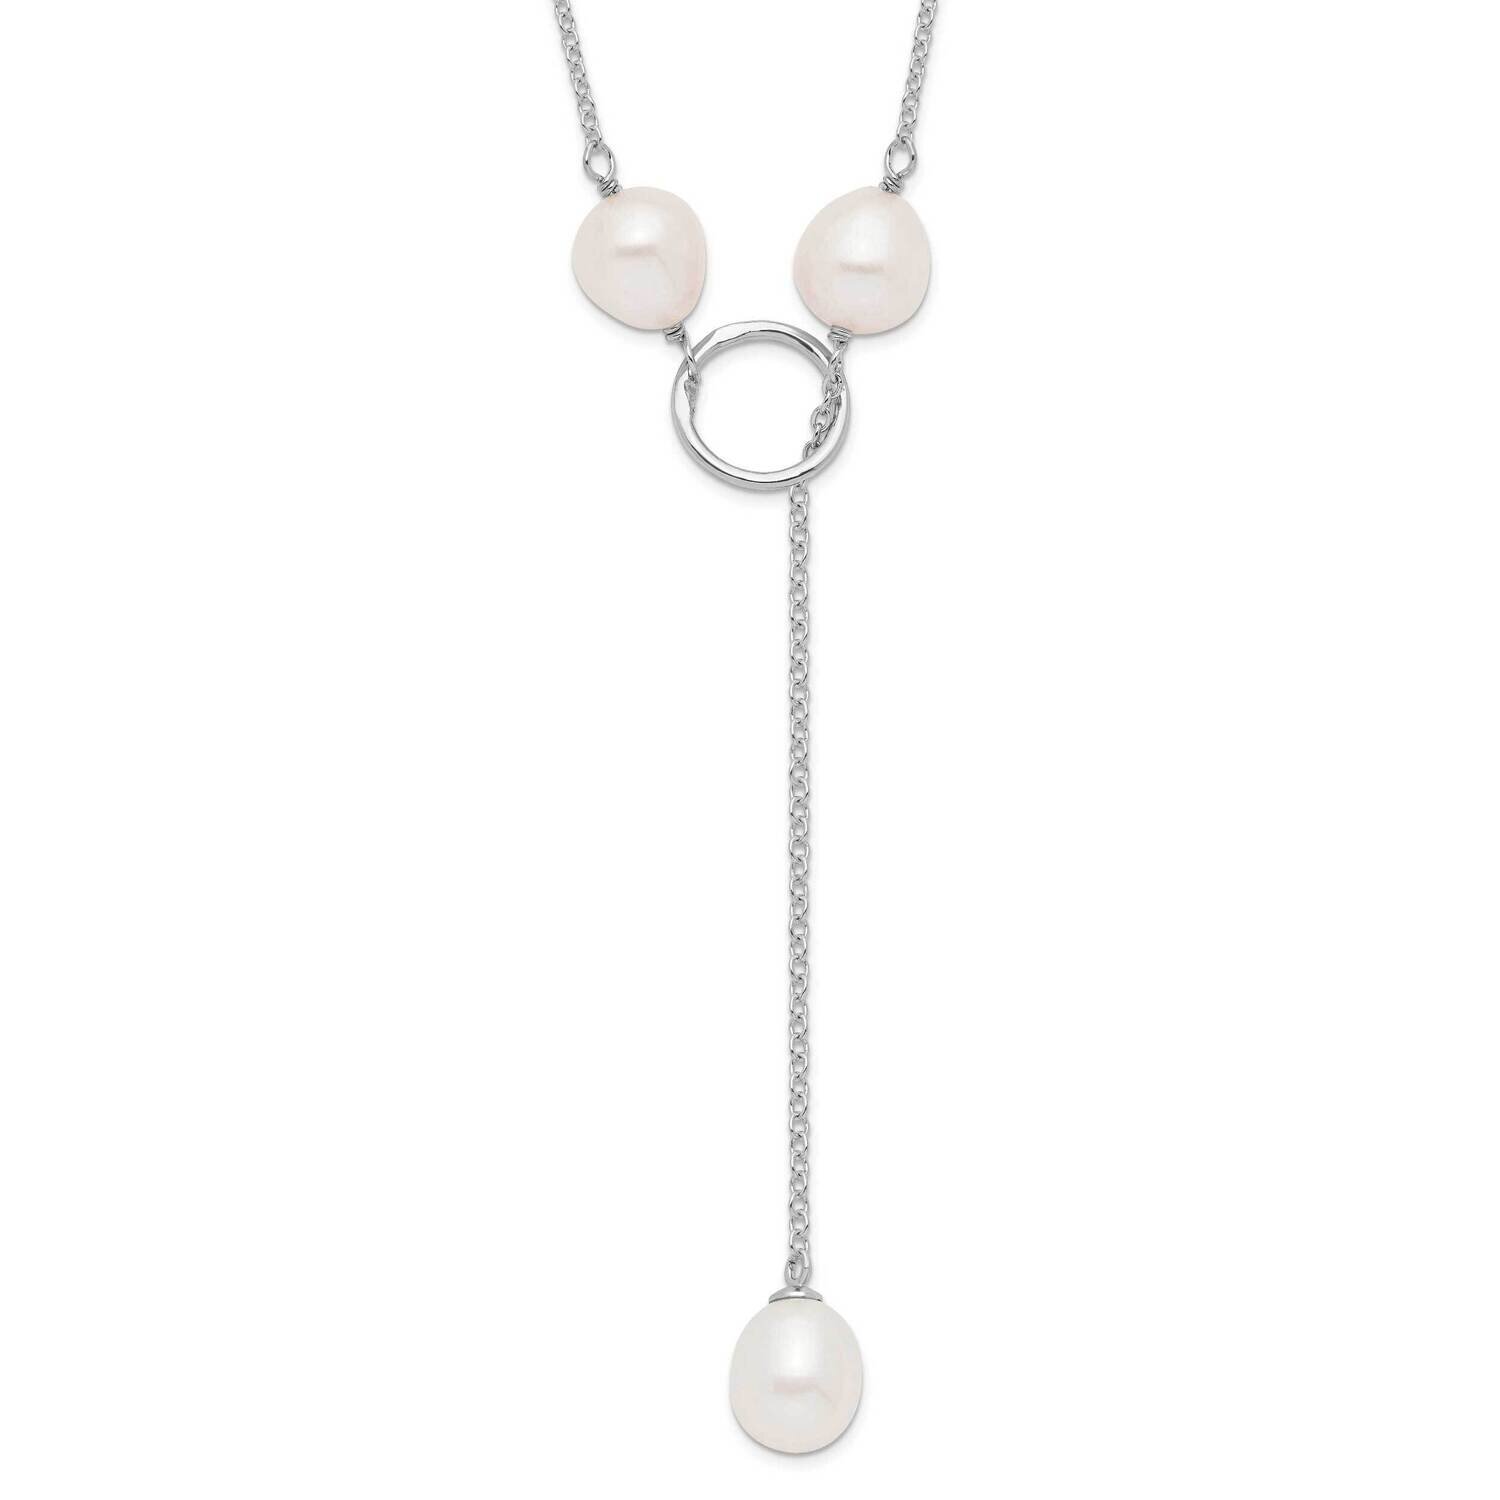 7-8mm White Cultured Freshwater Pearl Toggle Necklace Sterling Silver Rhodium-plated QH5398-19